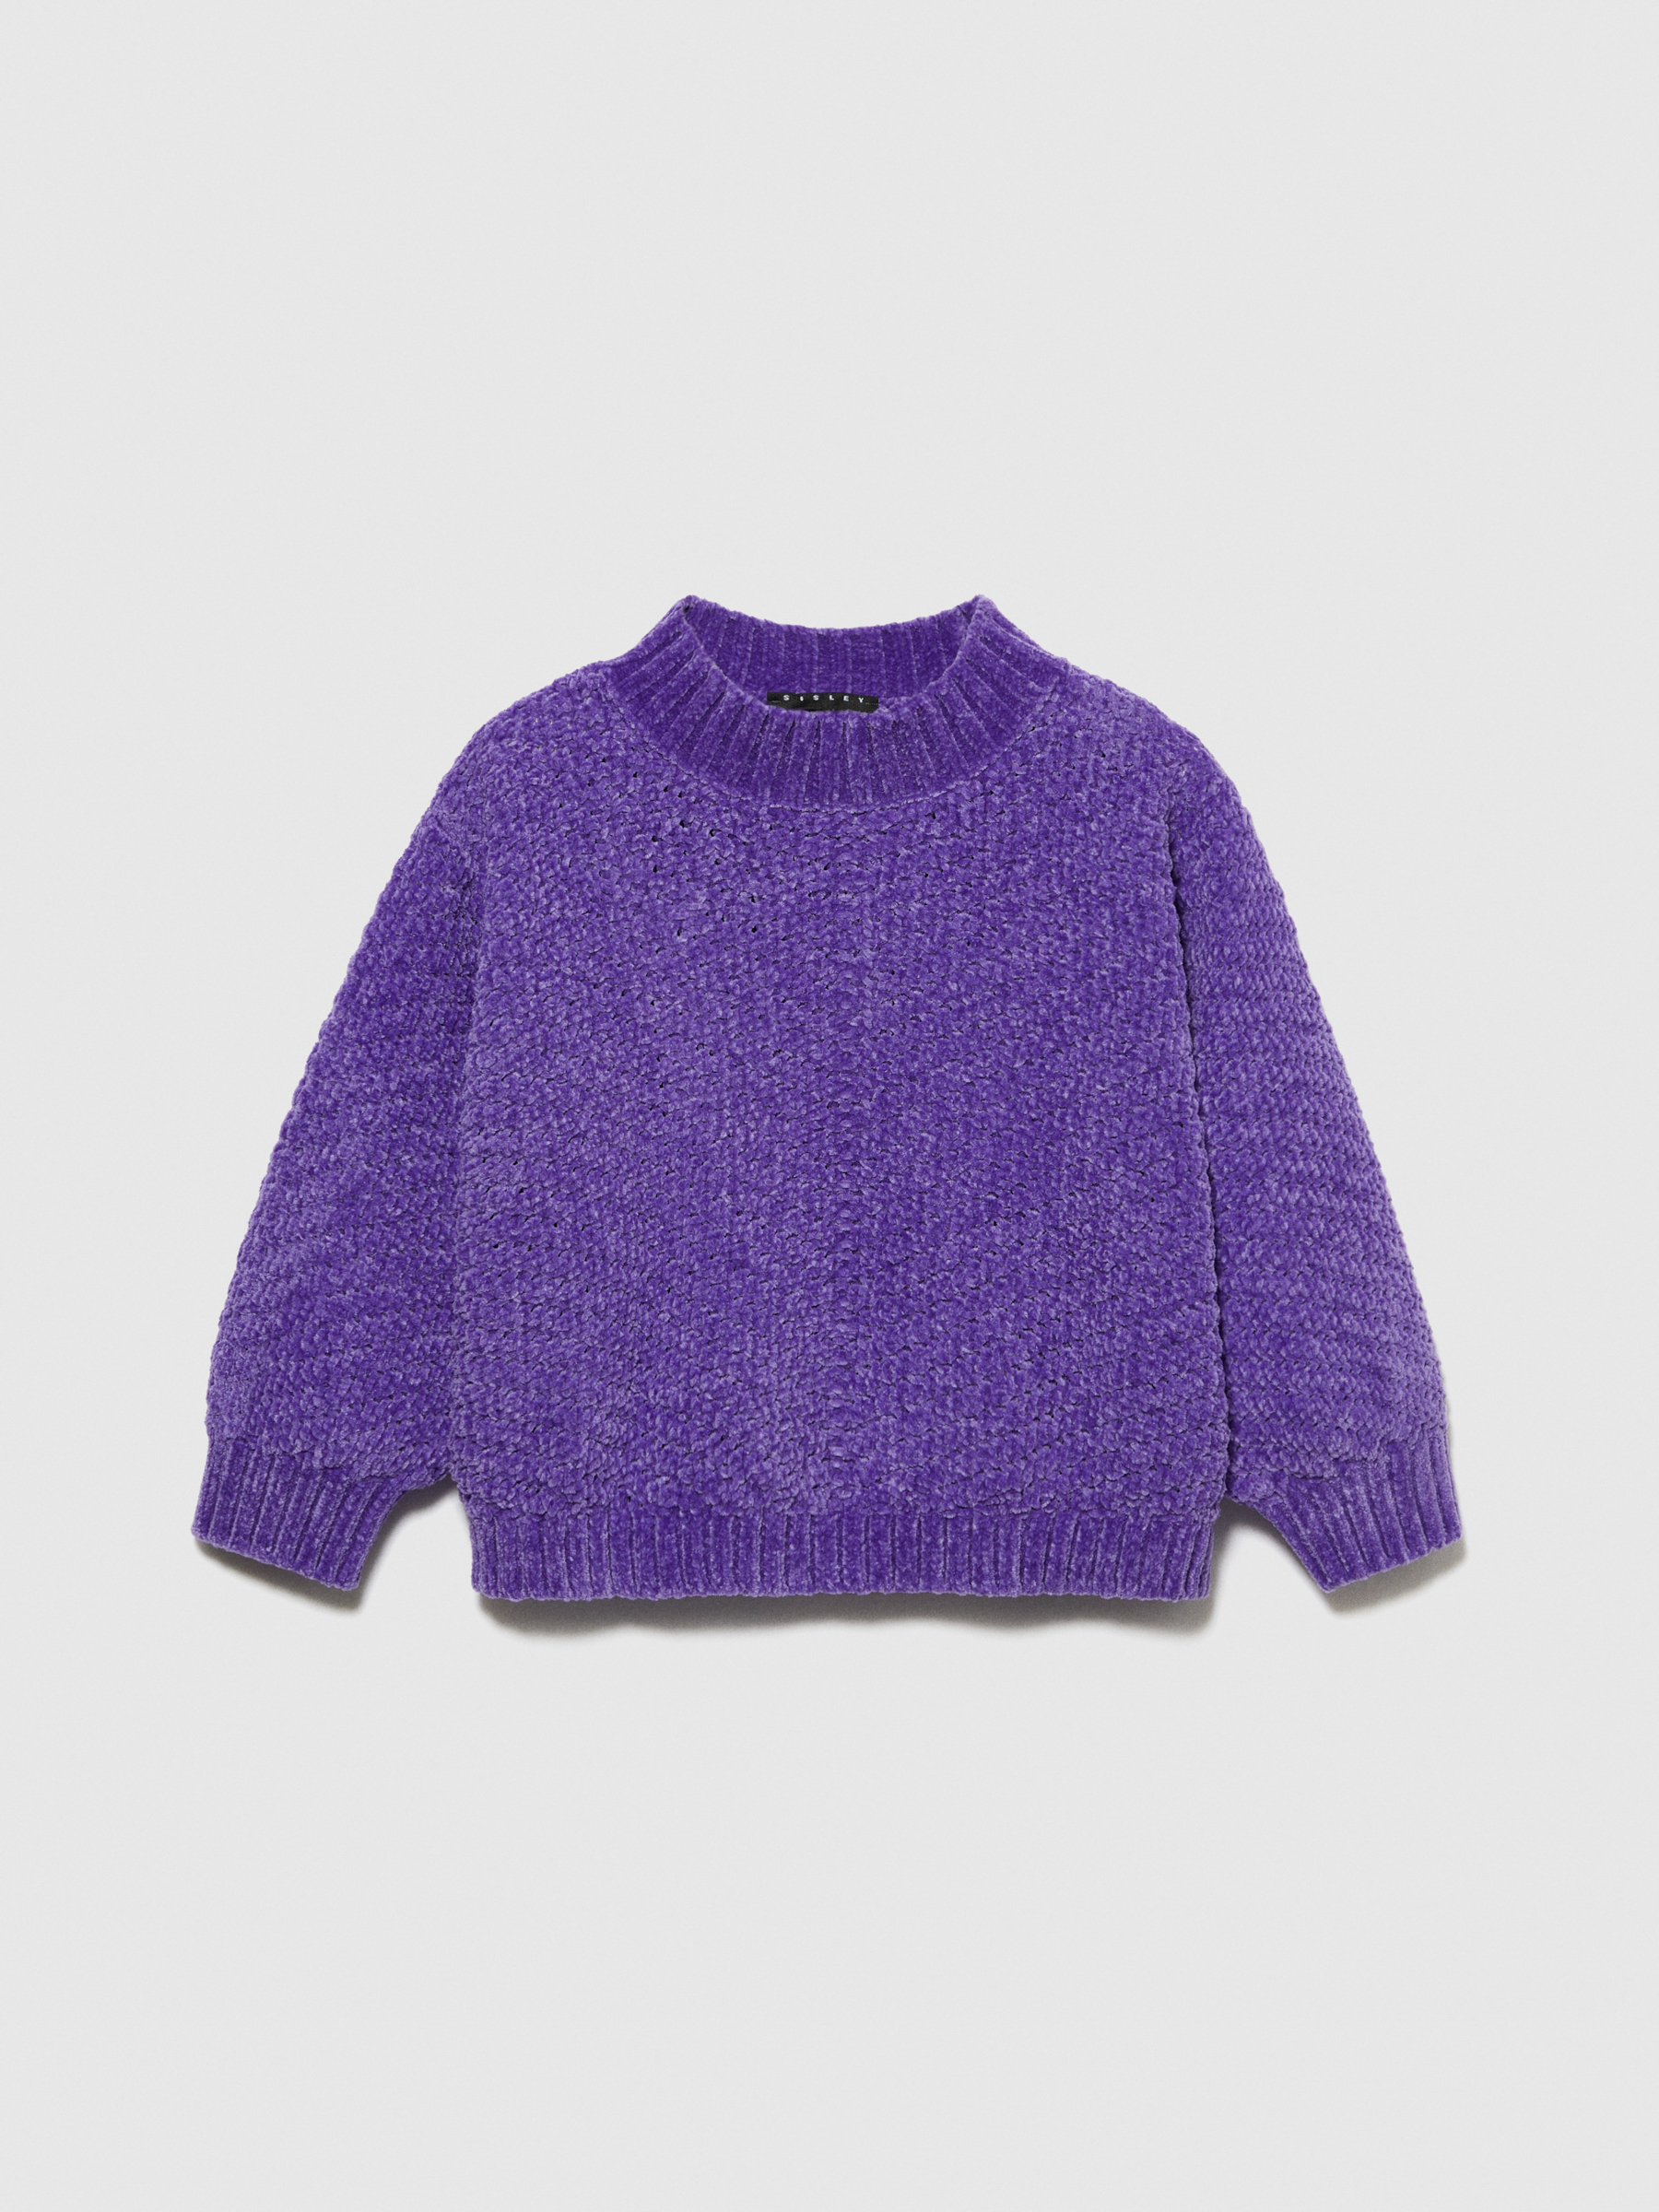 Sisley Young - Cropped Chenille Sweater, Woman, Violet, Size: M